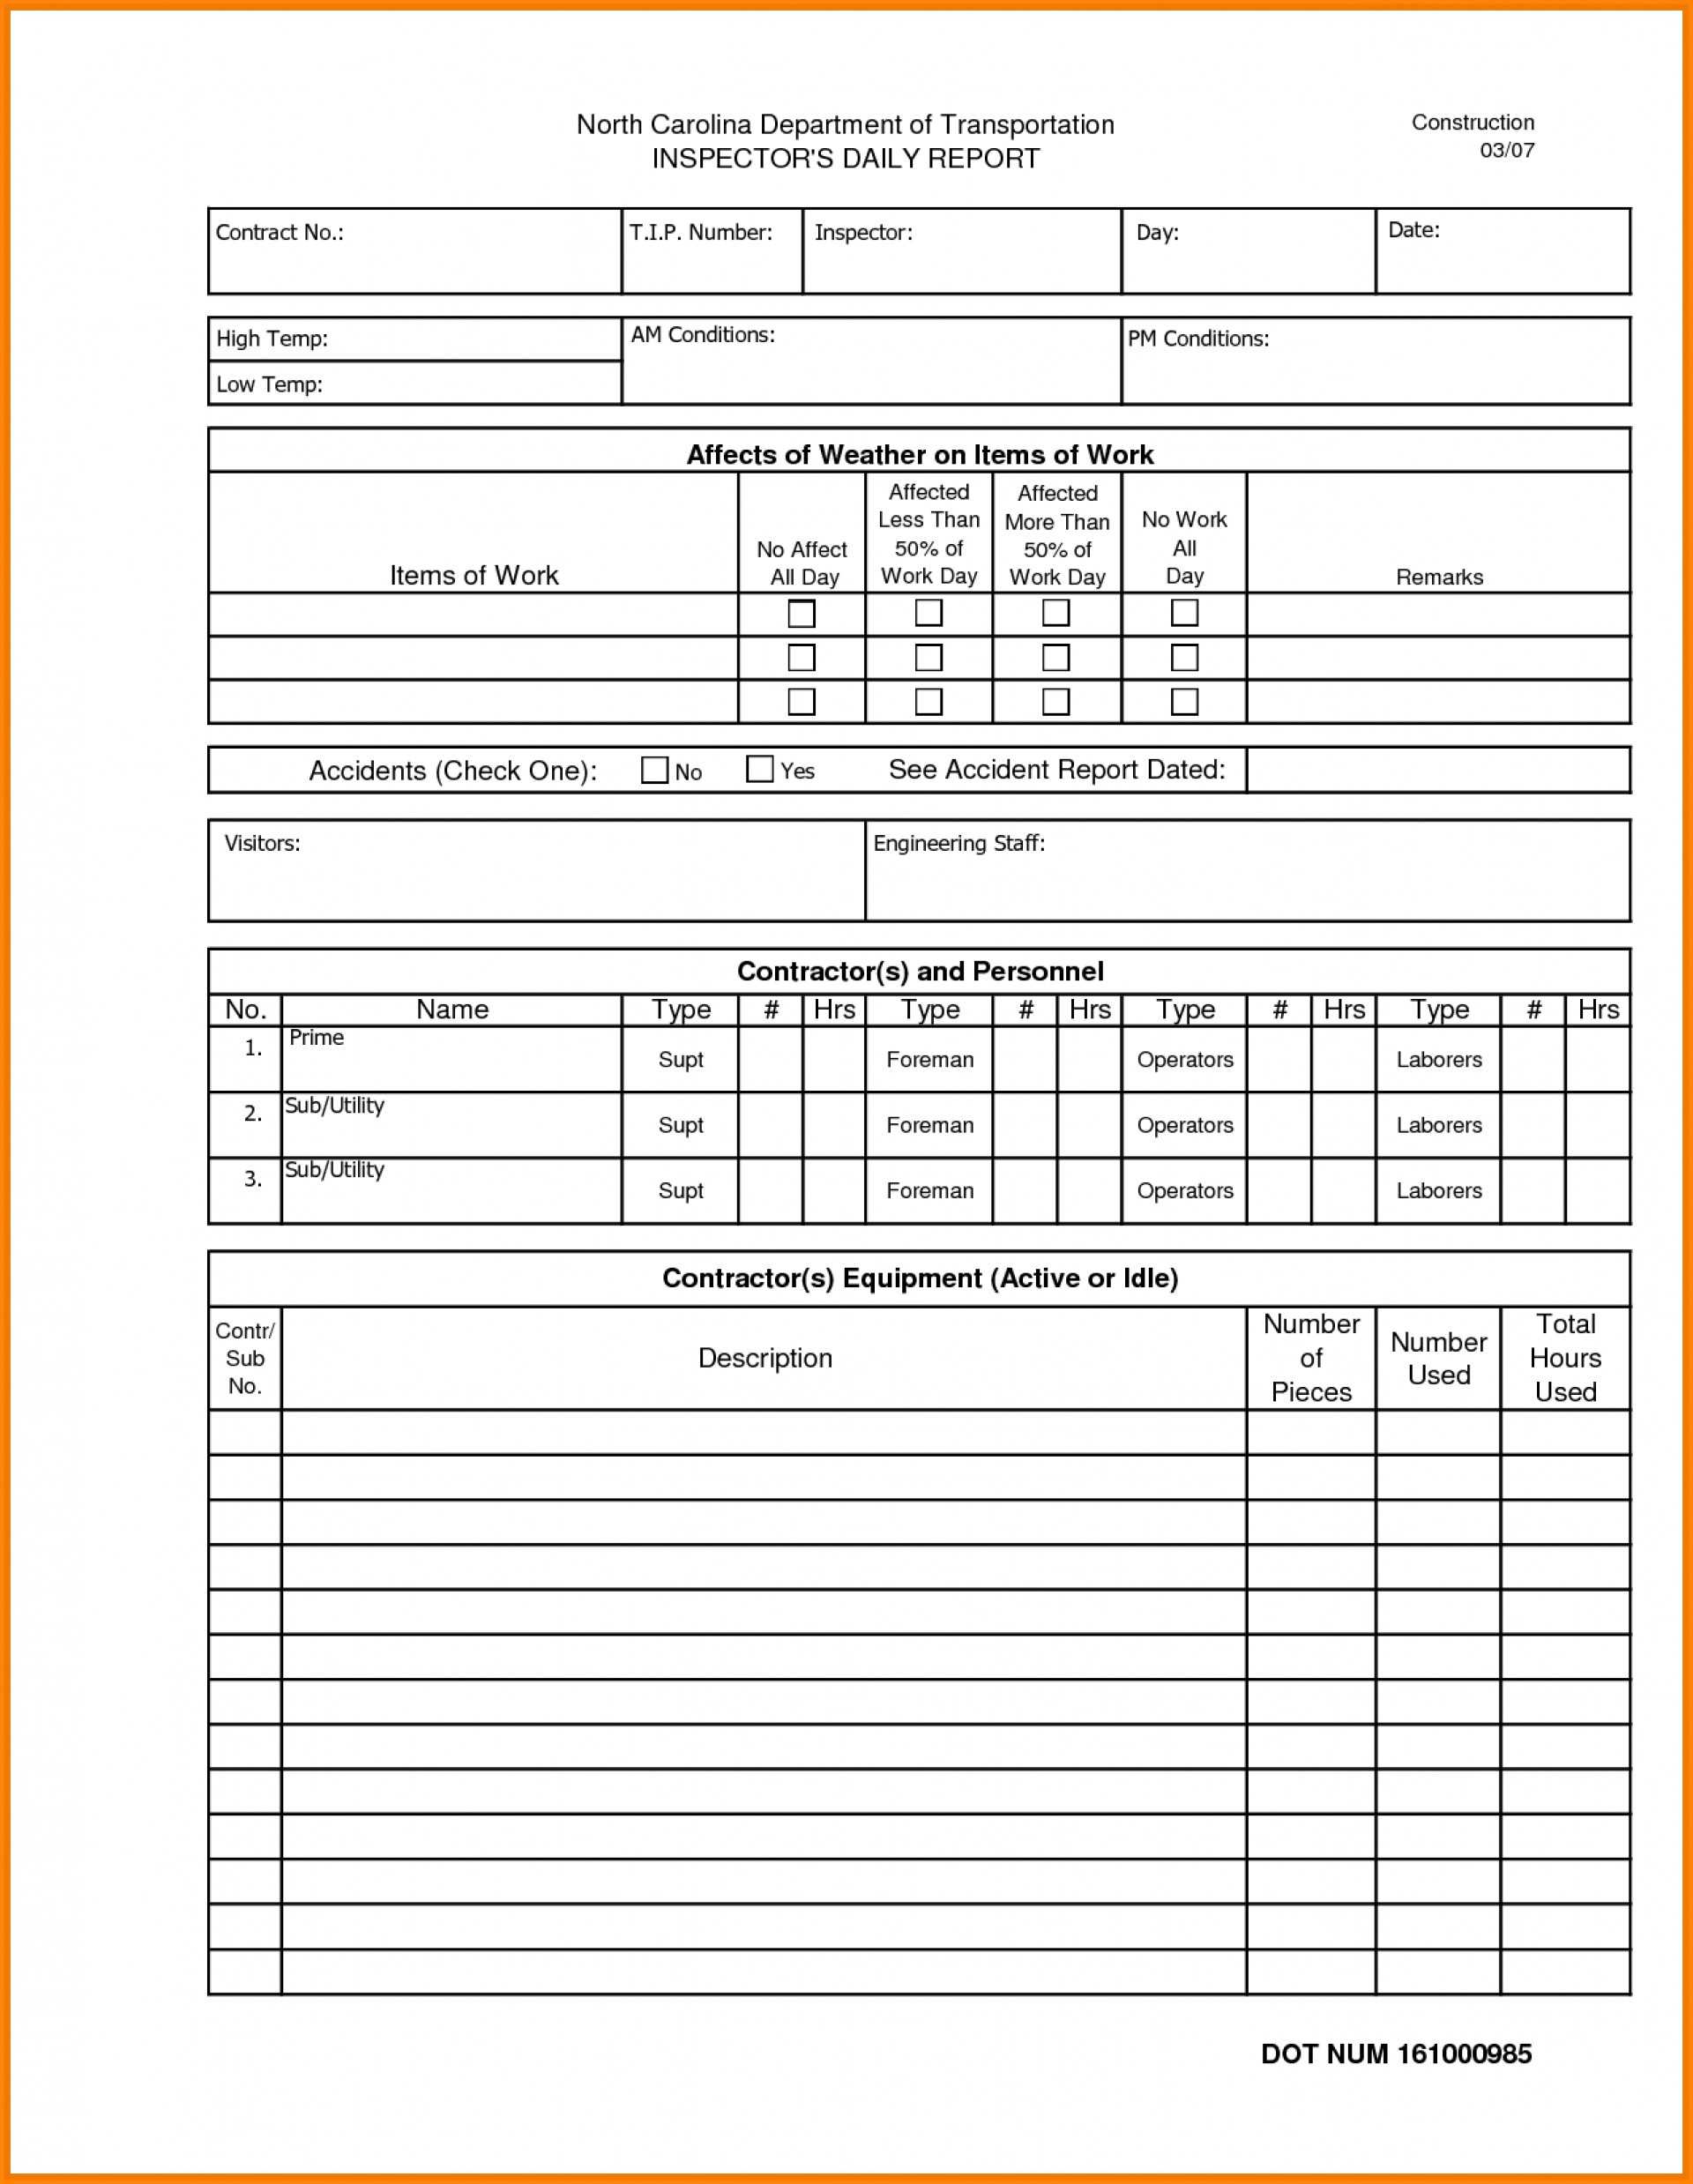 10 Project Progress Reports Templates | Business Letter Within Progress Report Template For Construction Project